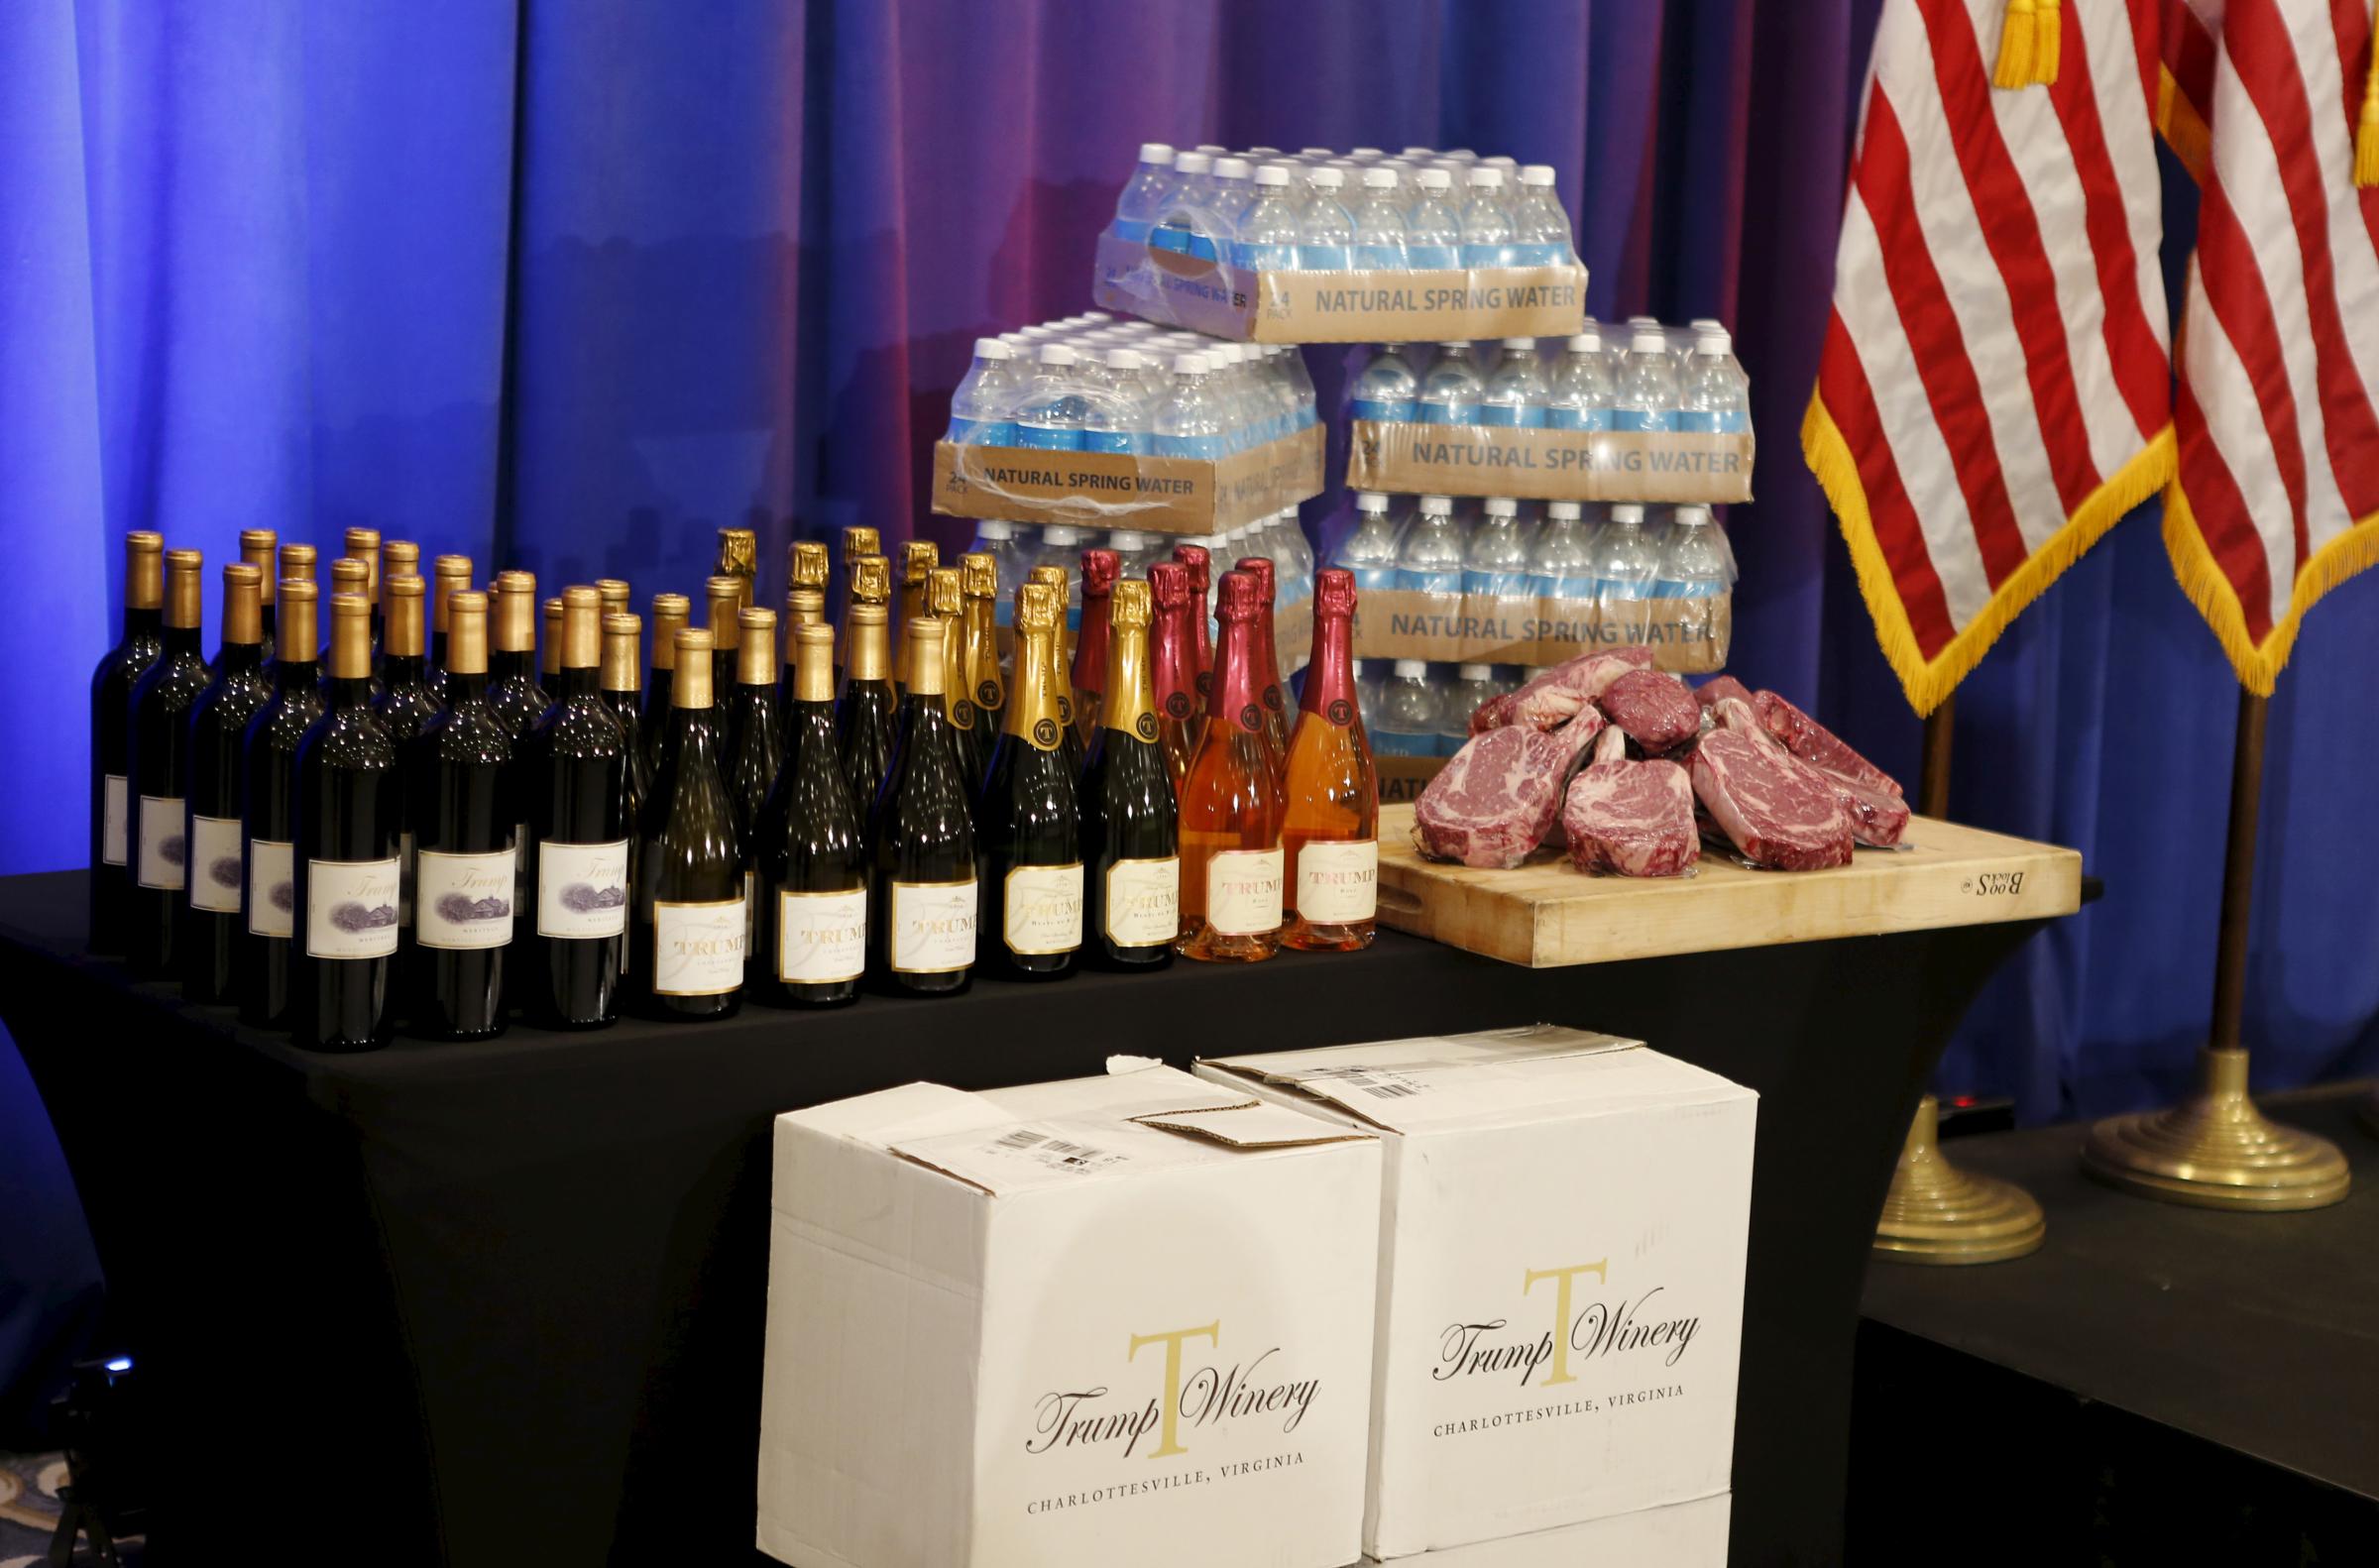 Steaks and chops described as 'Trump meat' are shown near the podium with Trump branded wines and water before U.S. Republican presidential candidate Donald Trump was scheduled to appear at a press event at his Trump National Golf Club in Jupiter